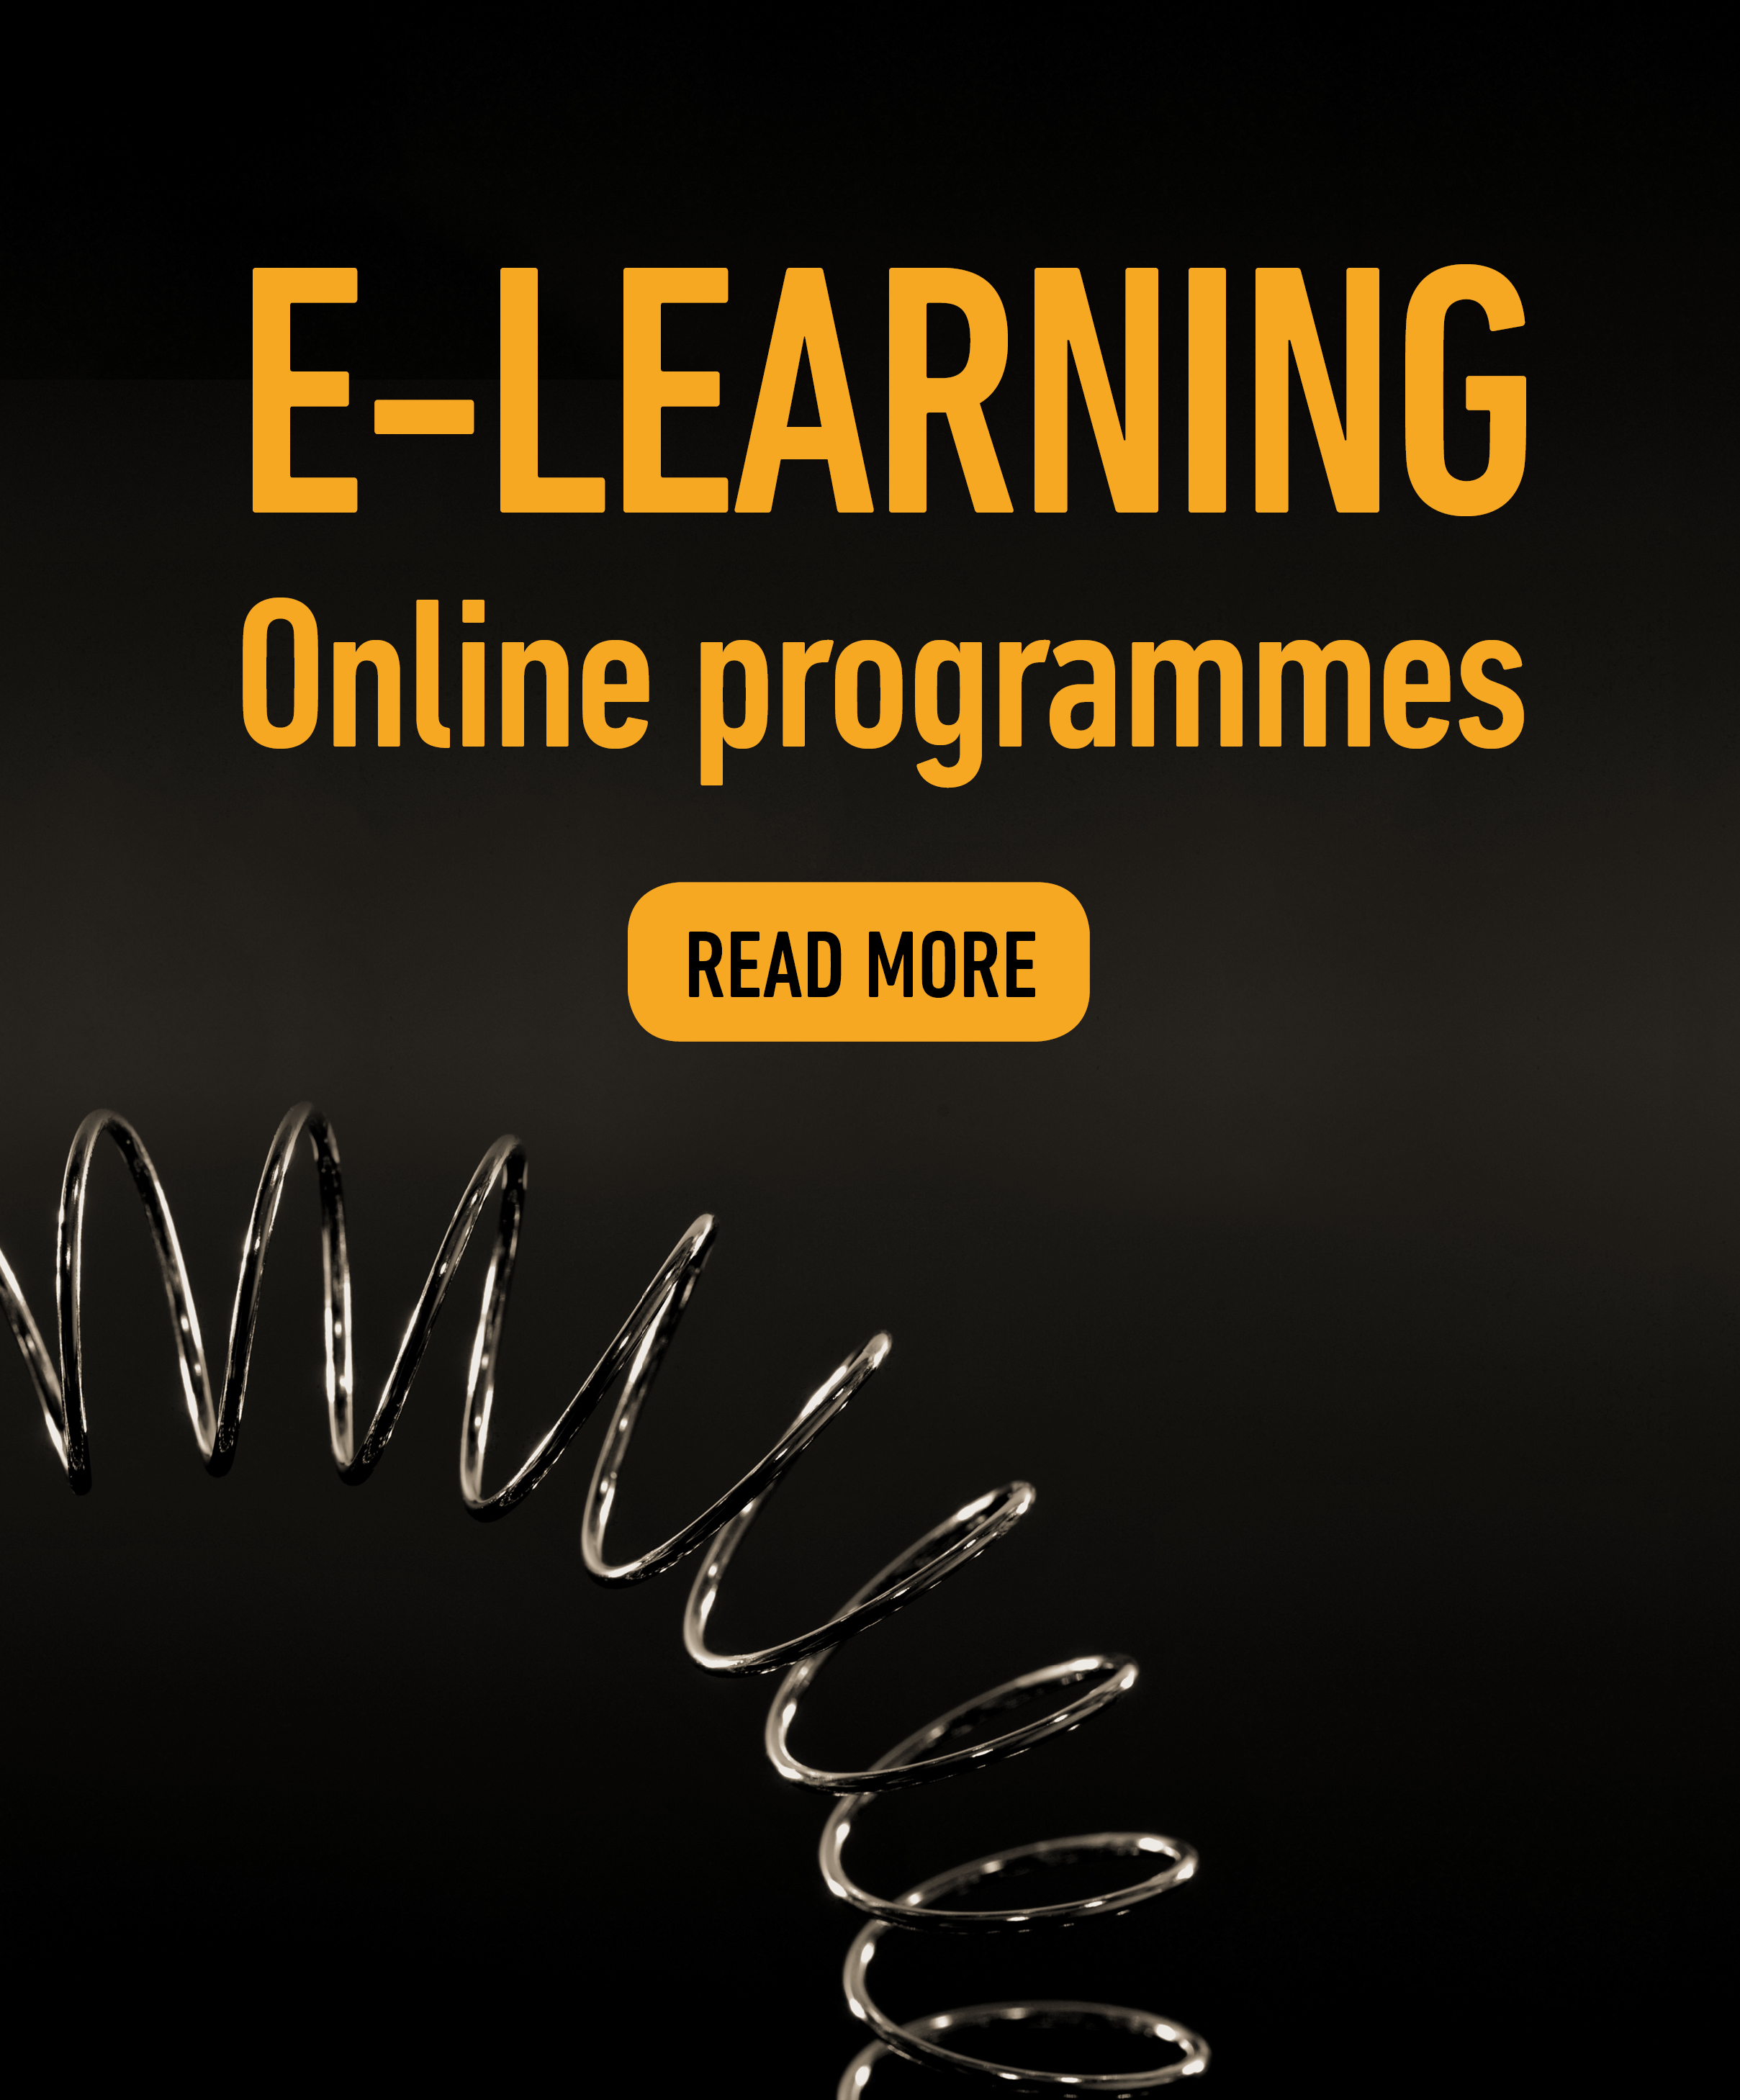 E-learning online programmes. Read more here